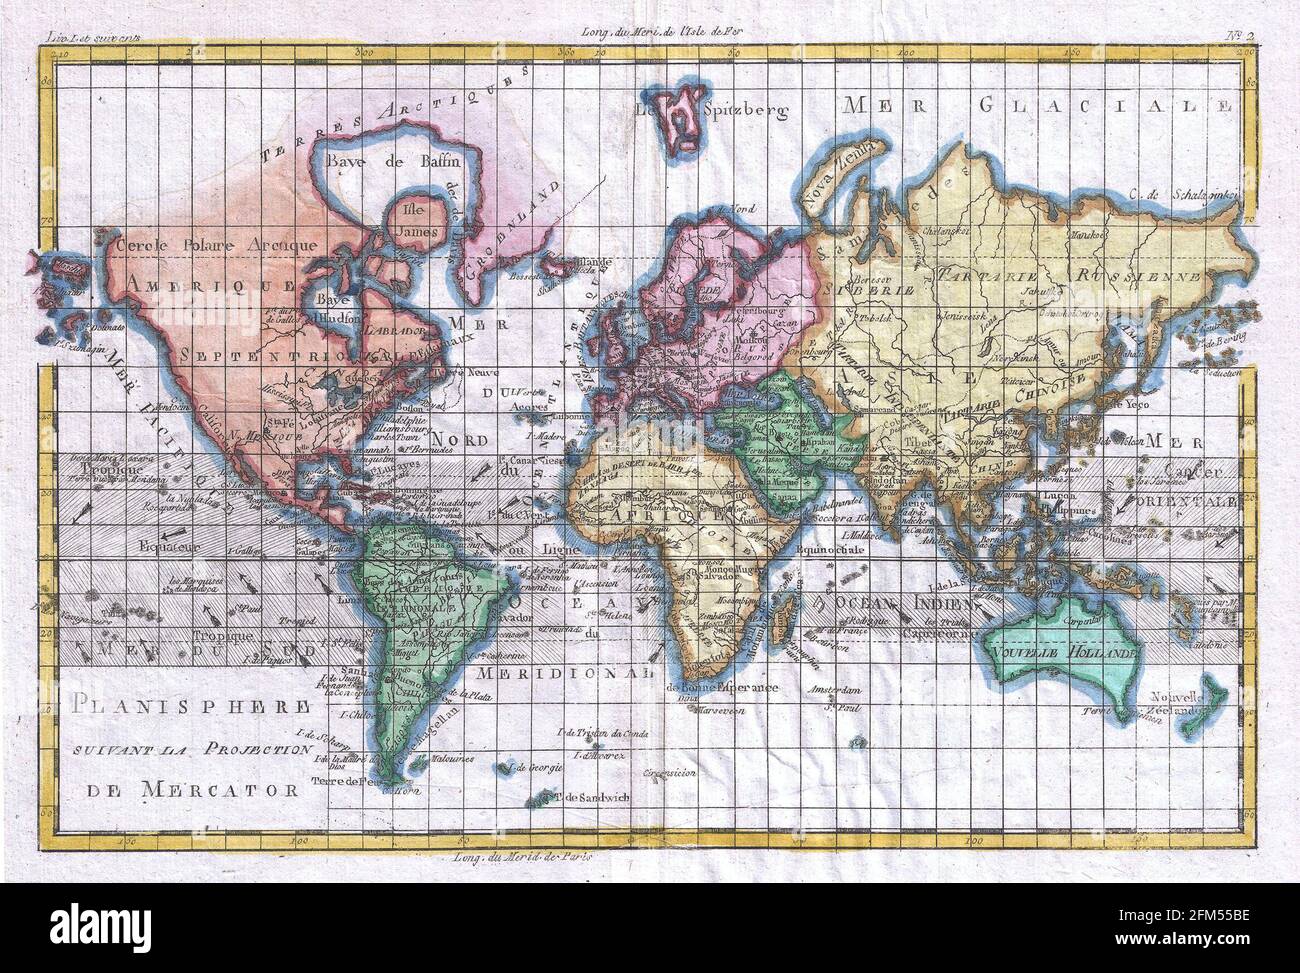 Vintage copper engraved map of the World from 18th century. All maps are beautifully colored and illustrated showing the world at the time. Stock Photo